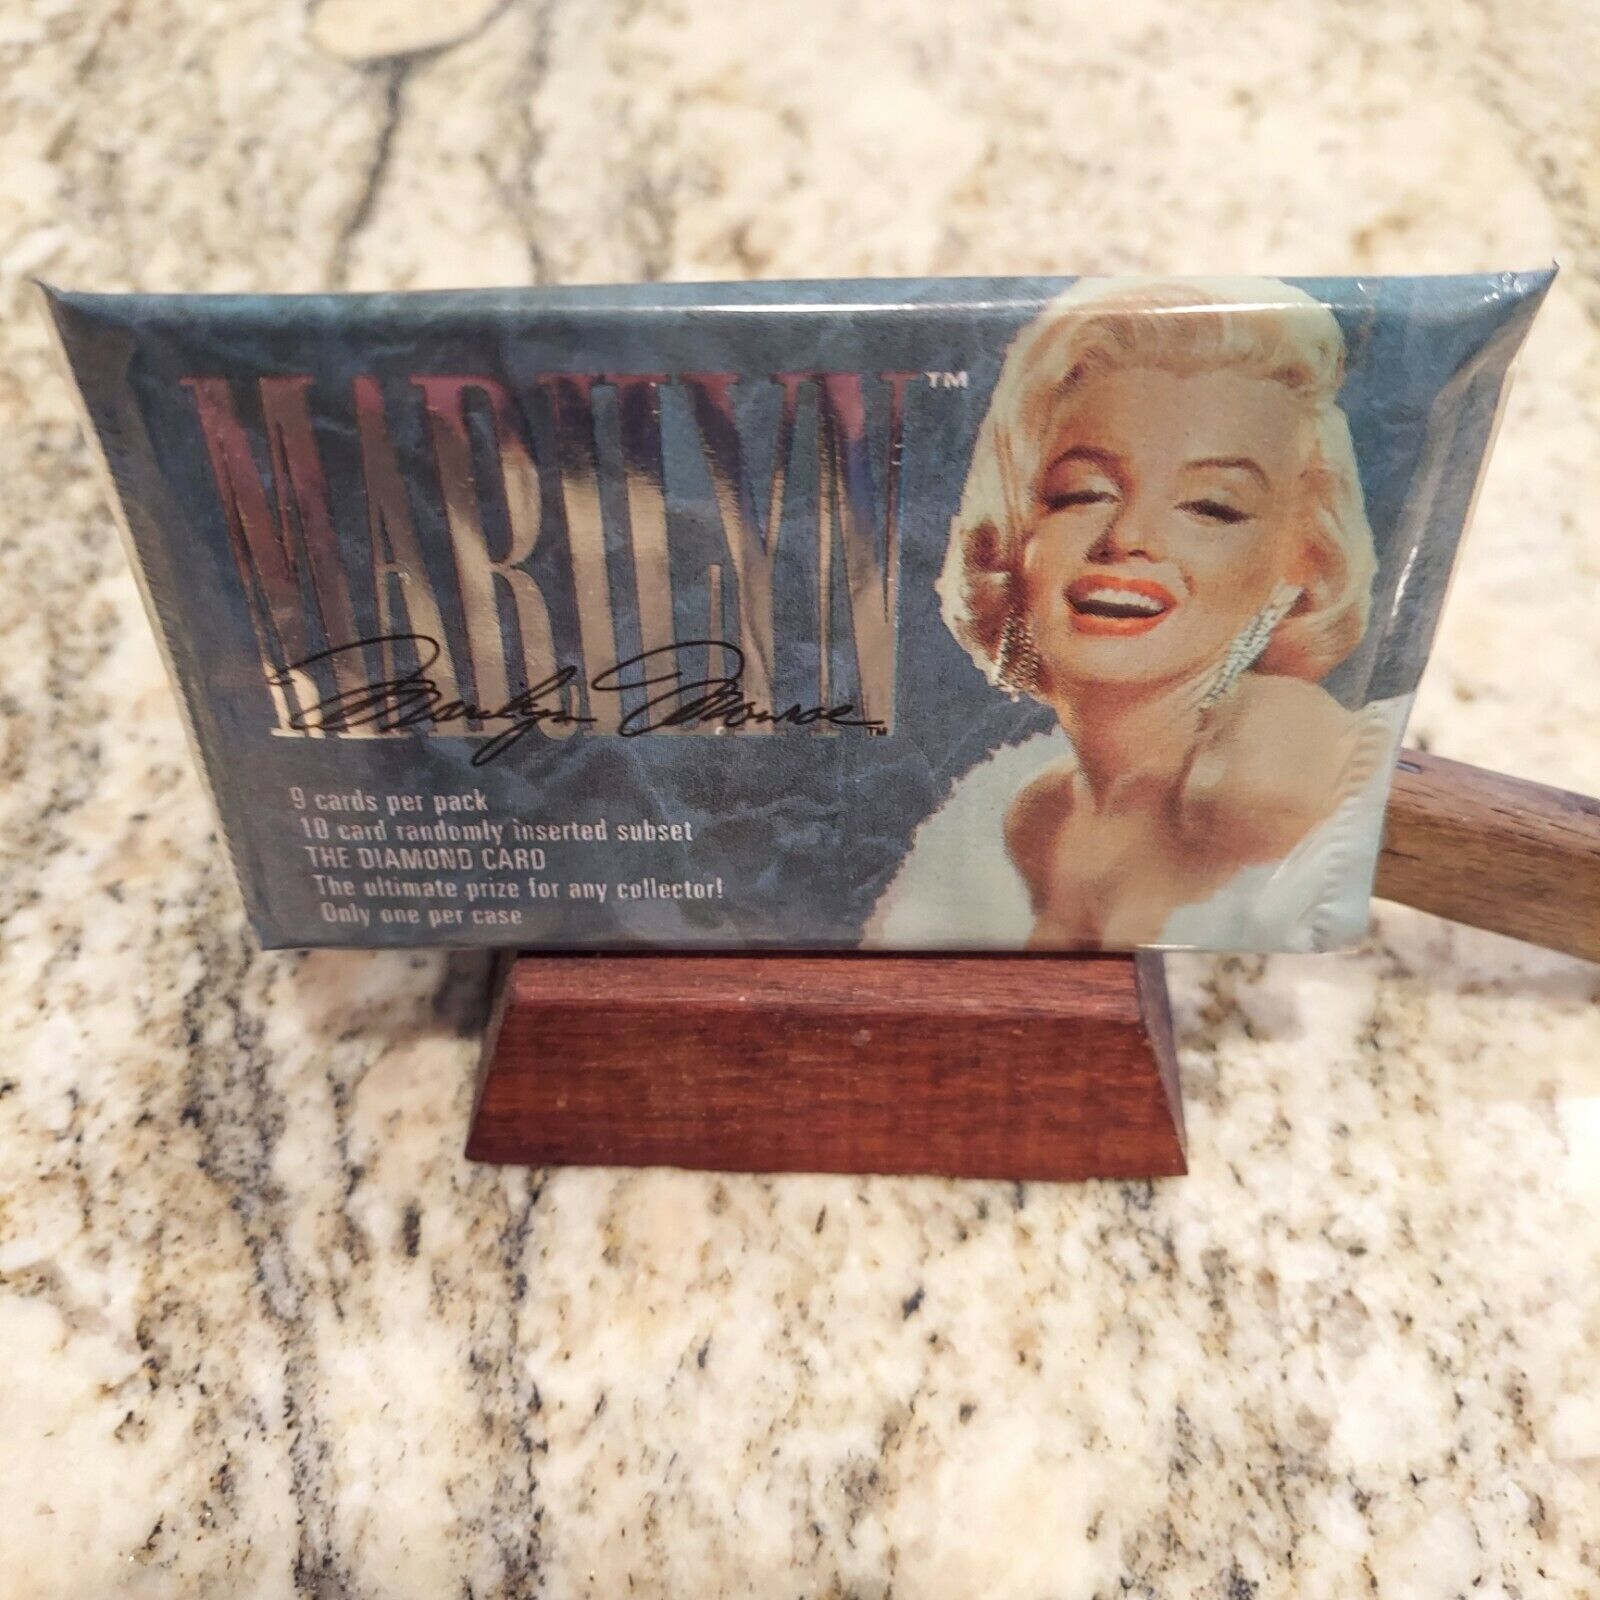 MARILYN MONROE  Sports Time Card Co. trading cards from 1993. 9 cards per pack